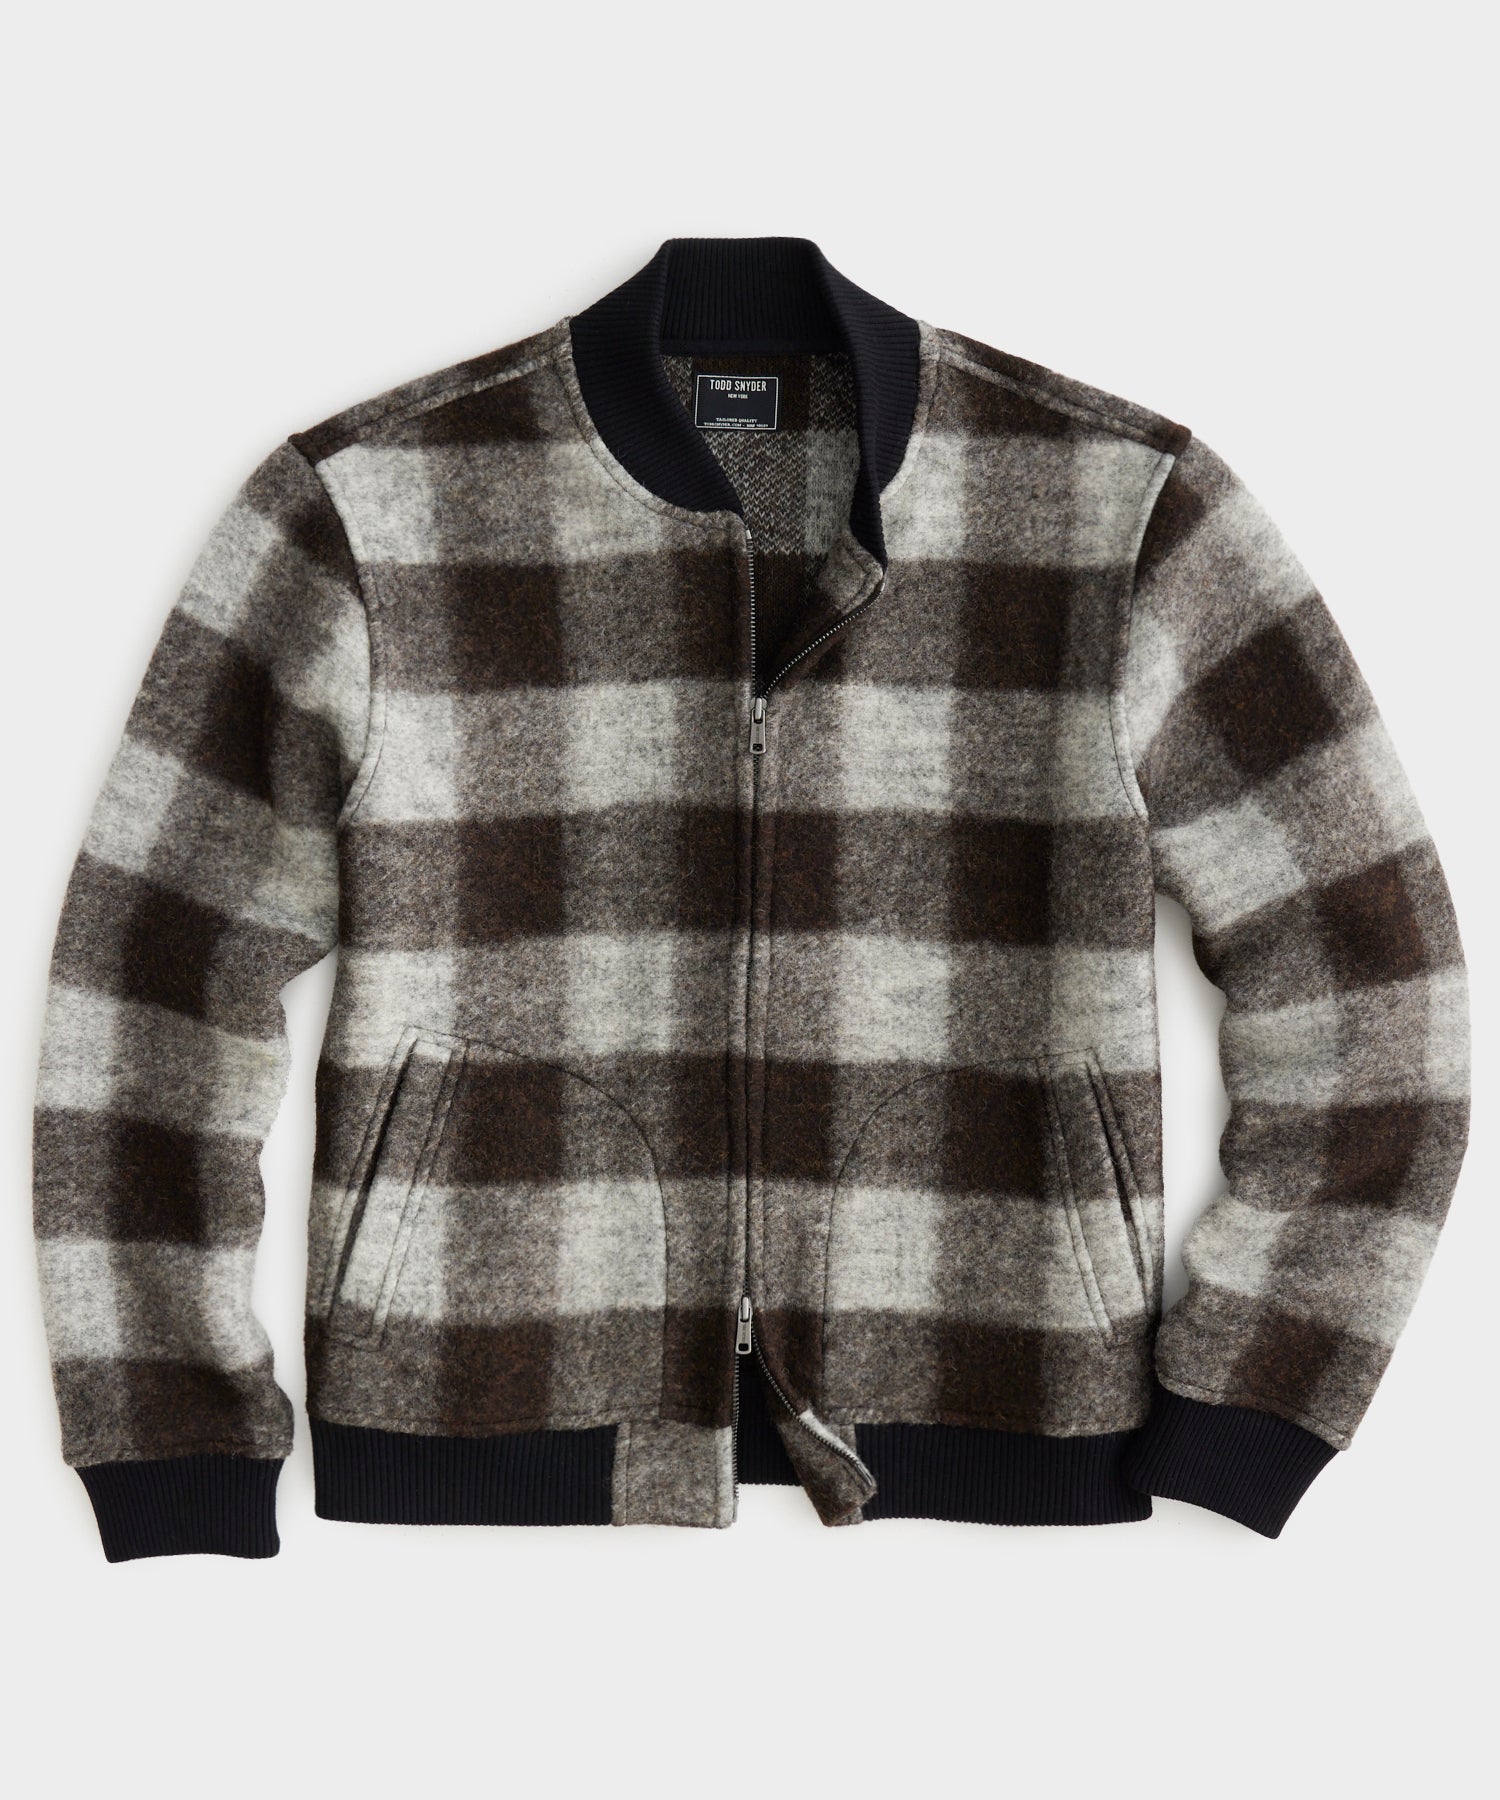 Brushed Buffalo Check Zip Bomber Jacket in Espresso Bean